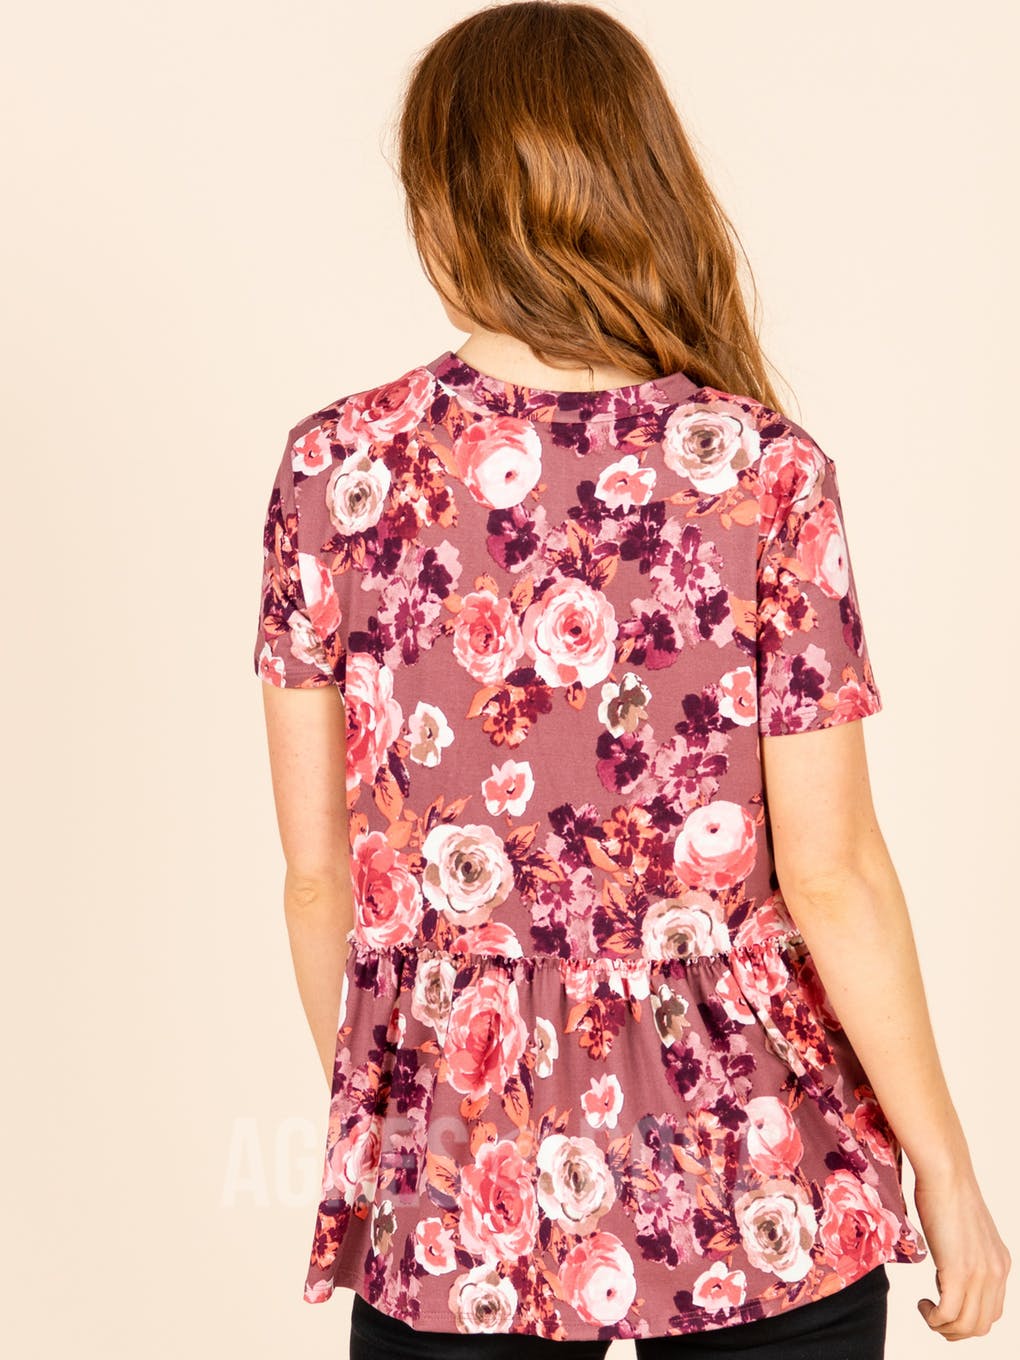 Relaxed Ruffle Tee Mauve Floral